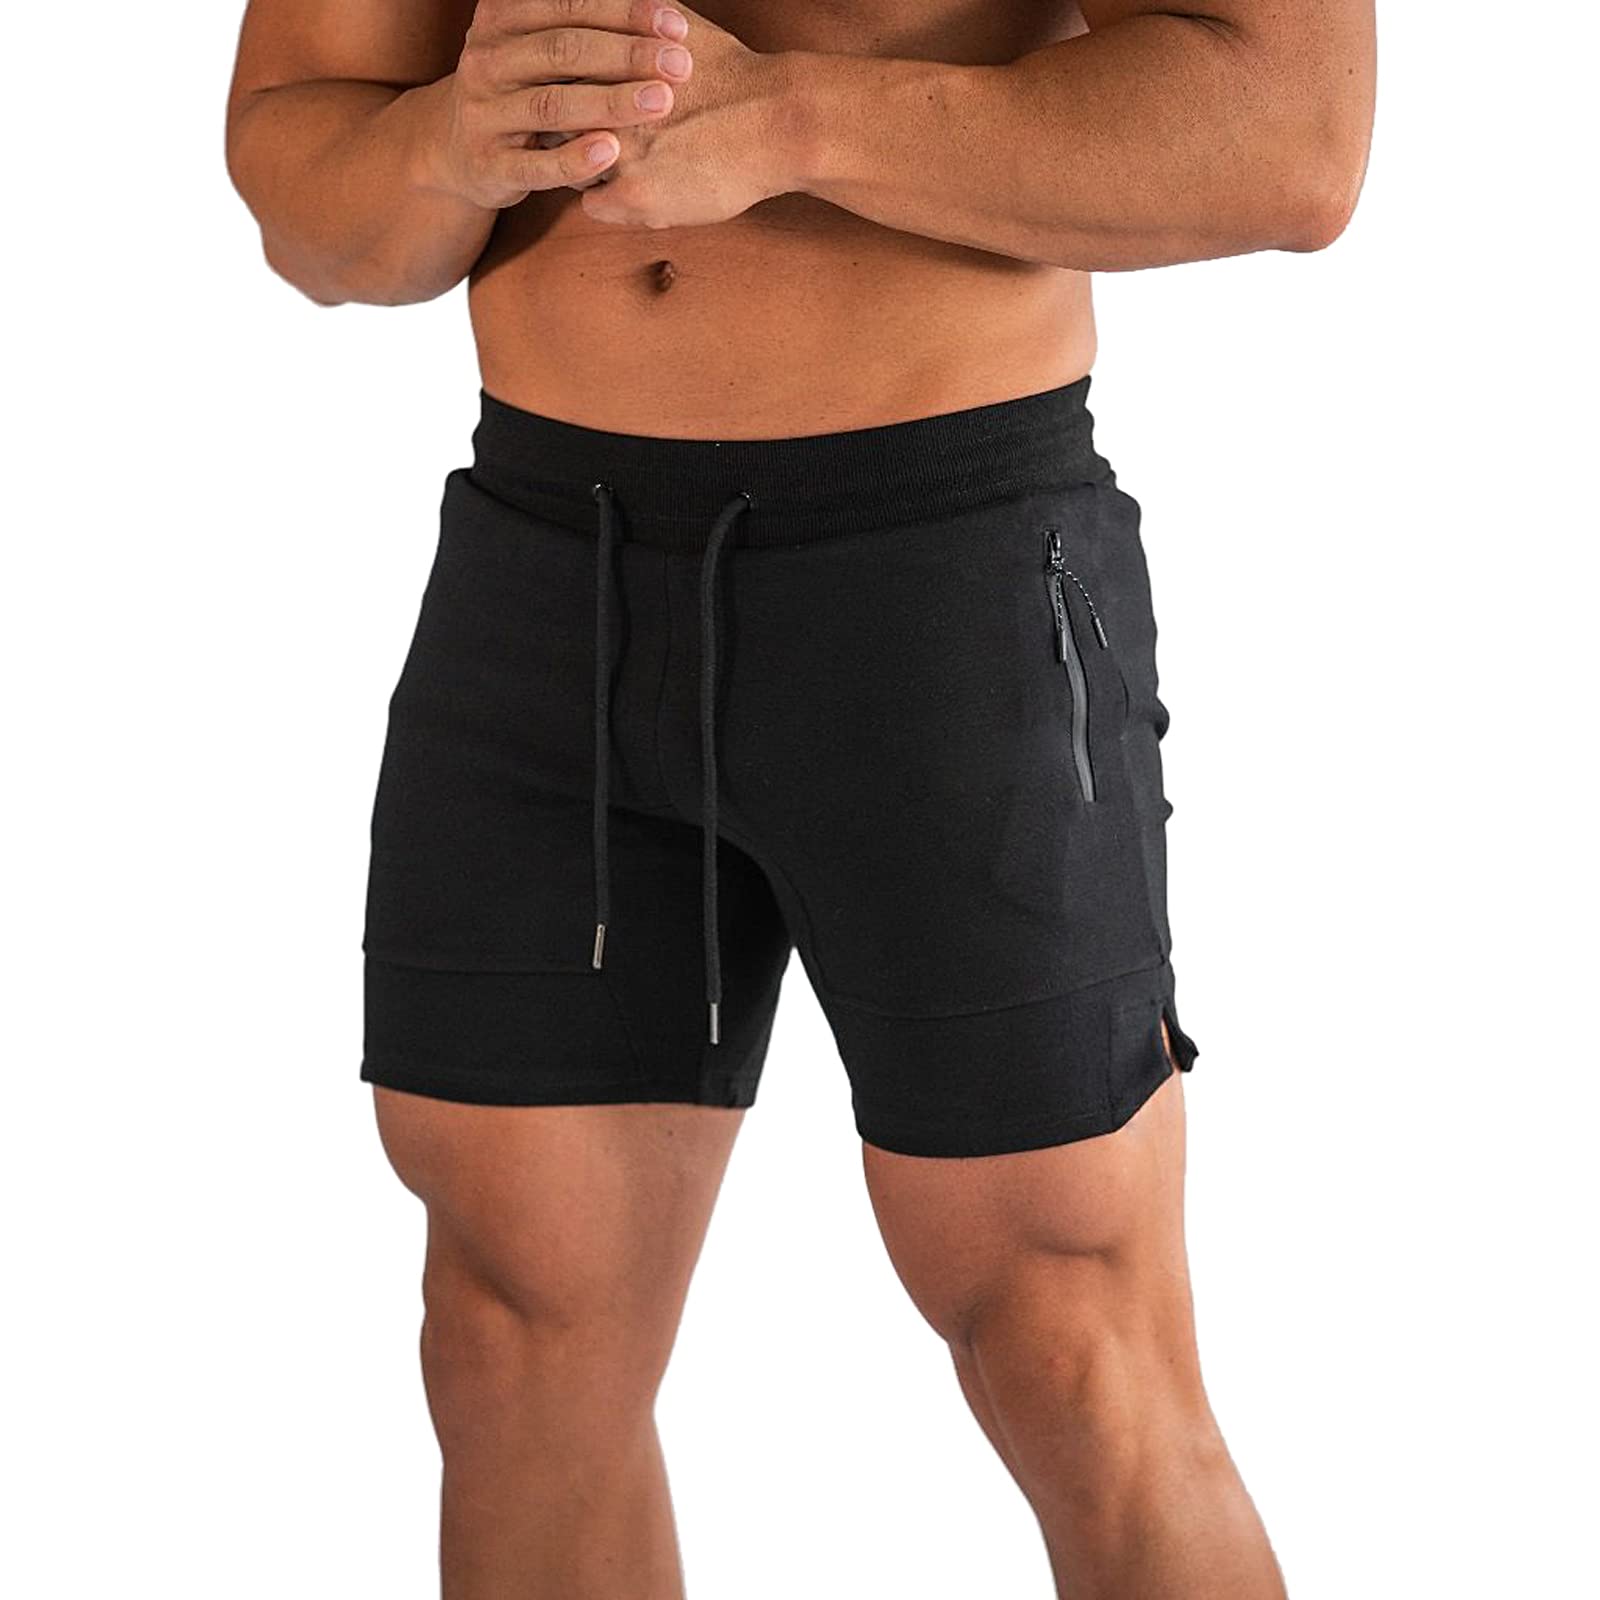 Mens Quick Dry Gym Shorts for Men Athletic Running Shorts with Zipper